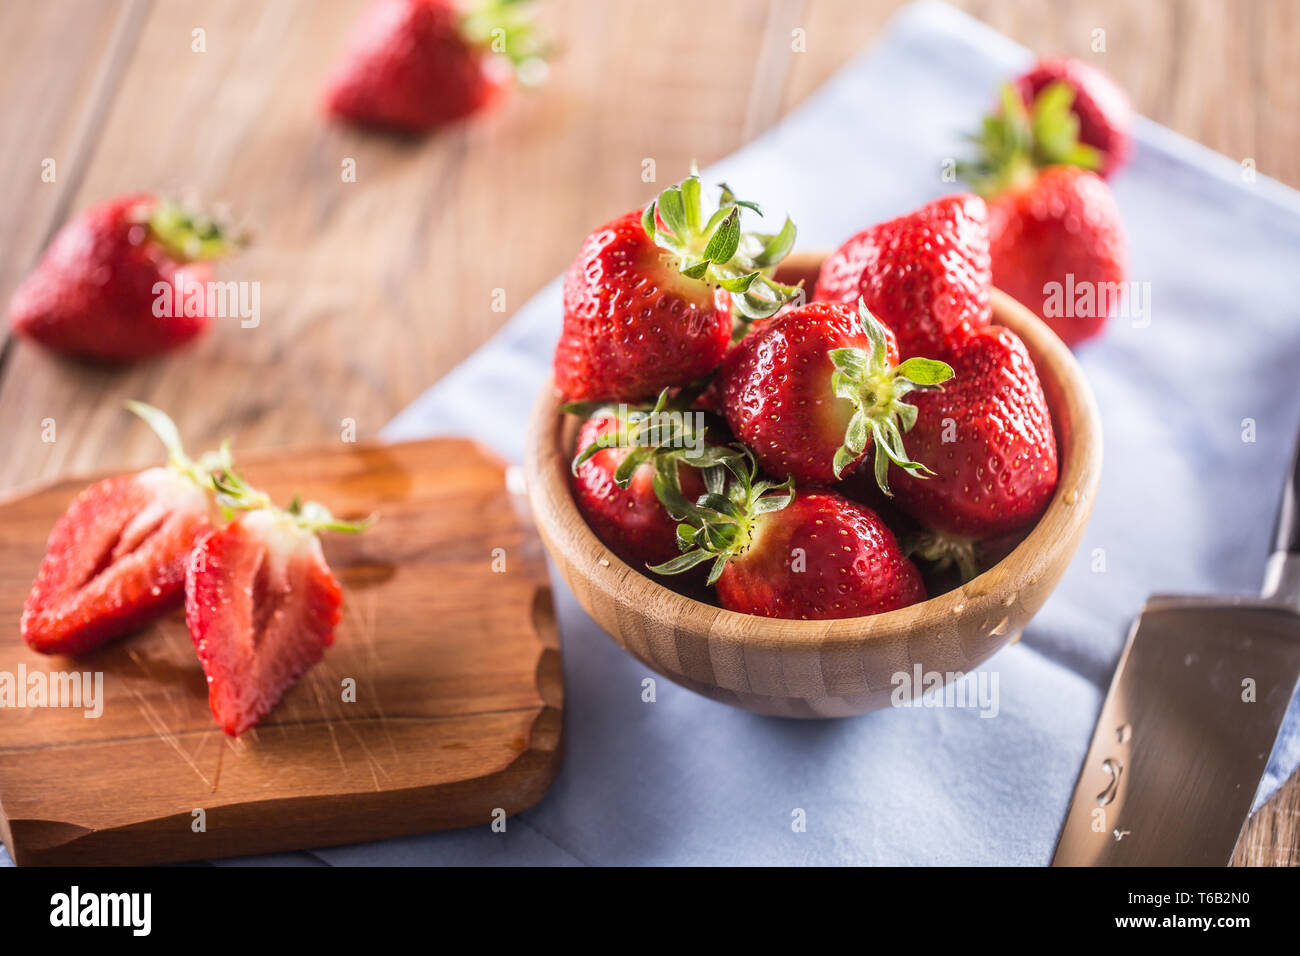 Juicy washed strawberries in wooden bowl on kitchen table Stock Photo